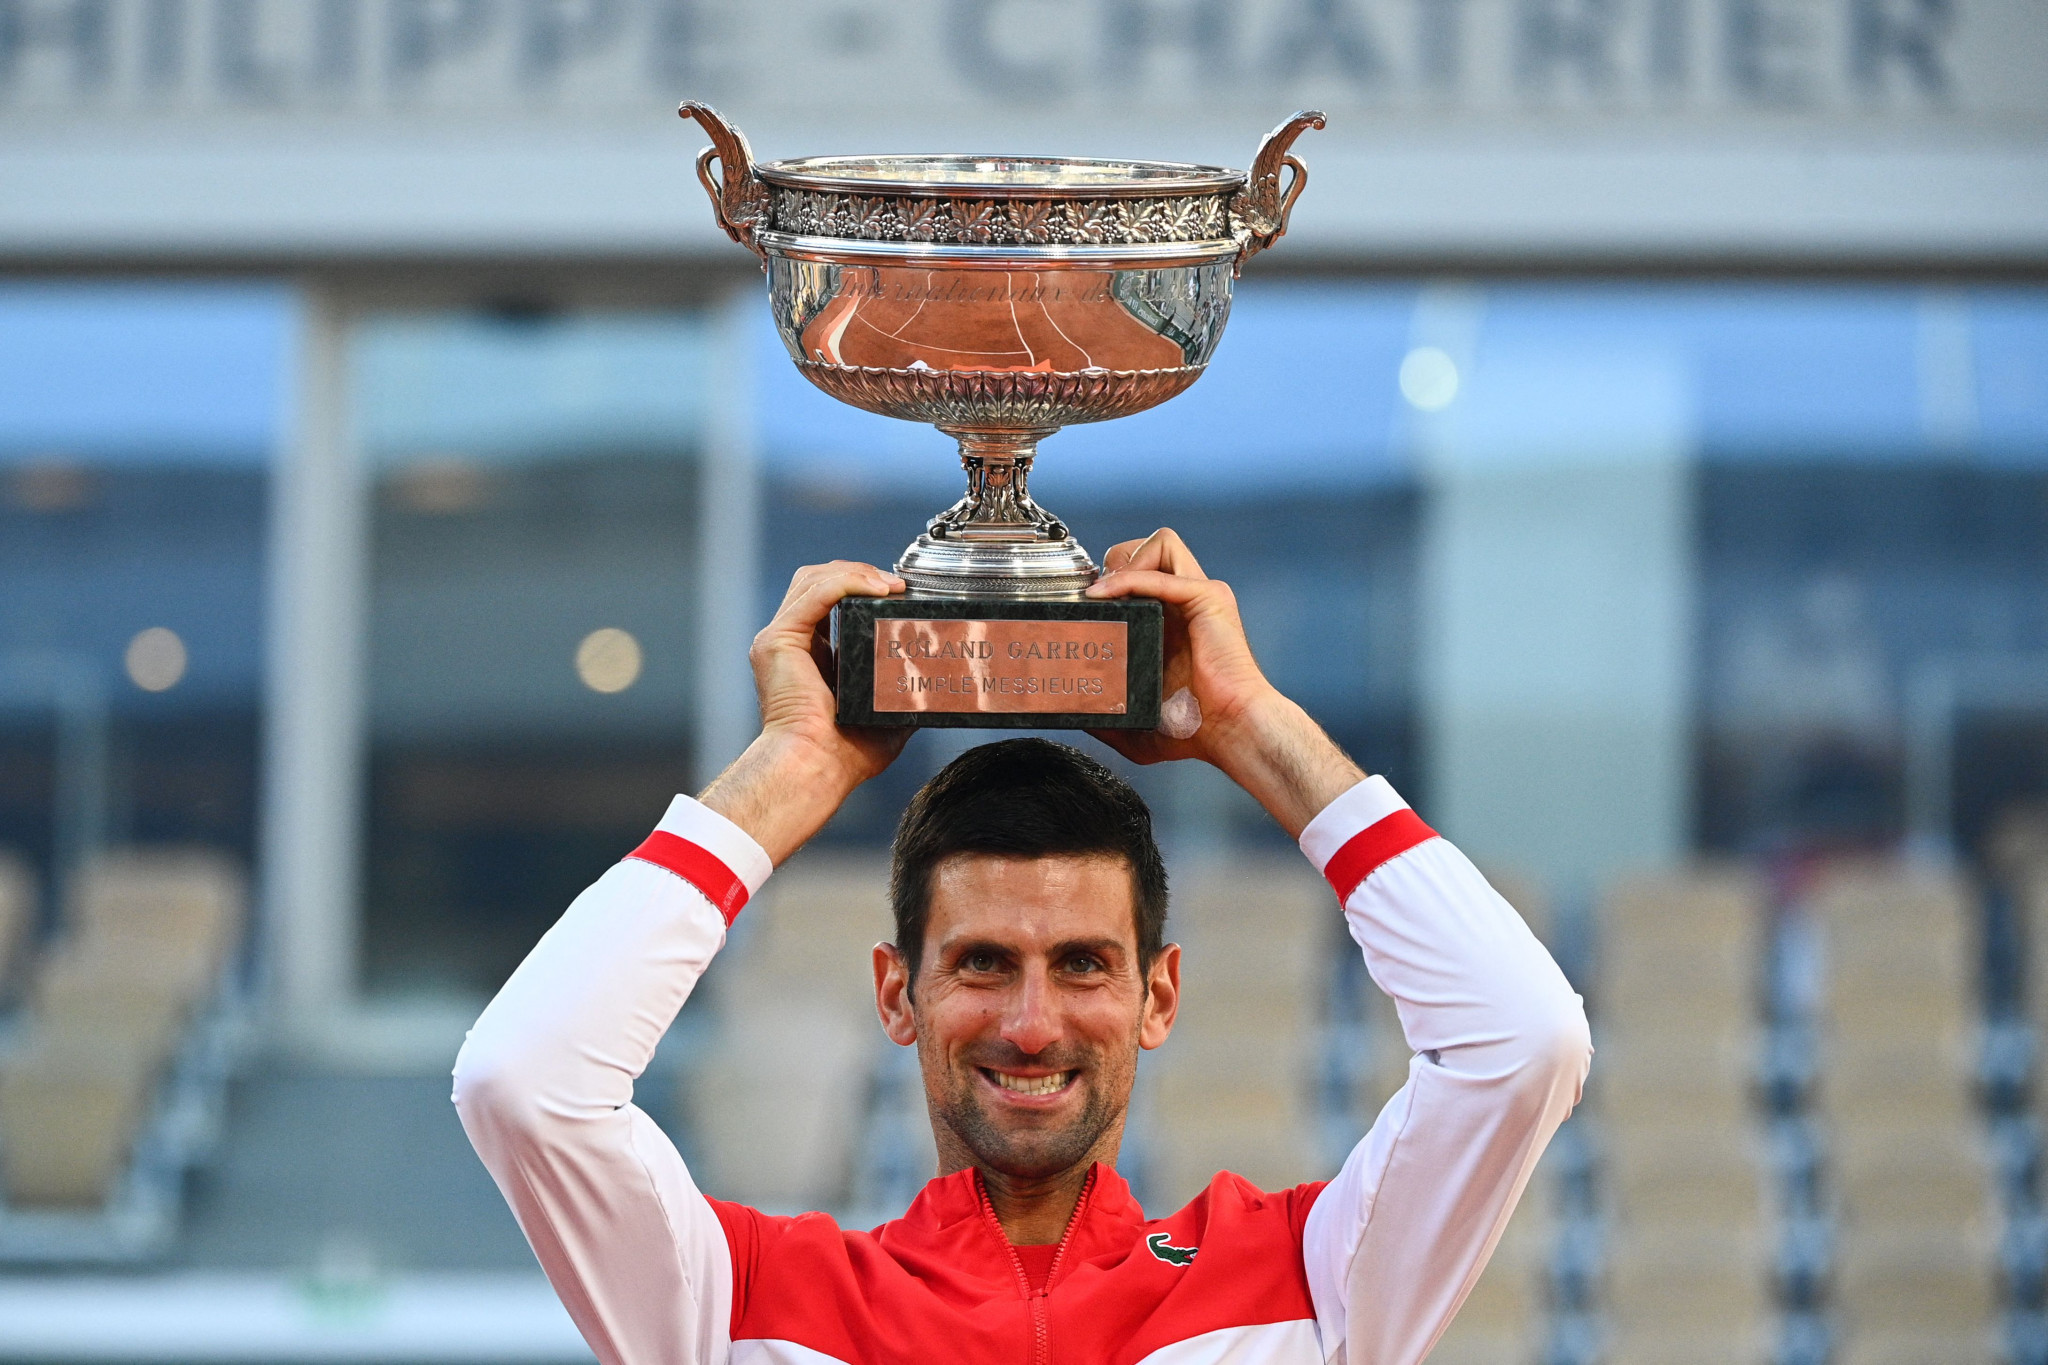 Novak Djokovic won his second French Open title after beating Stefanos Tsitsipas in five sets ©Getty Images